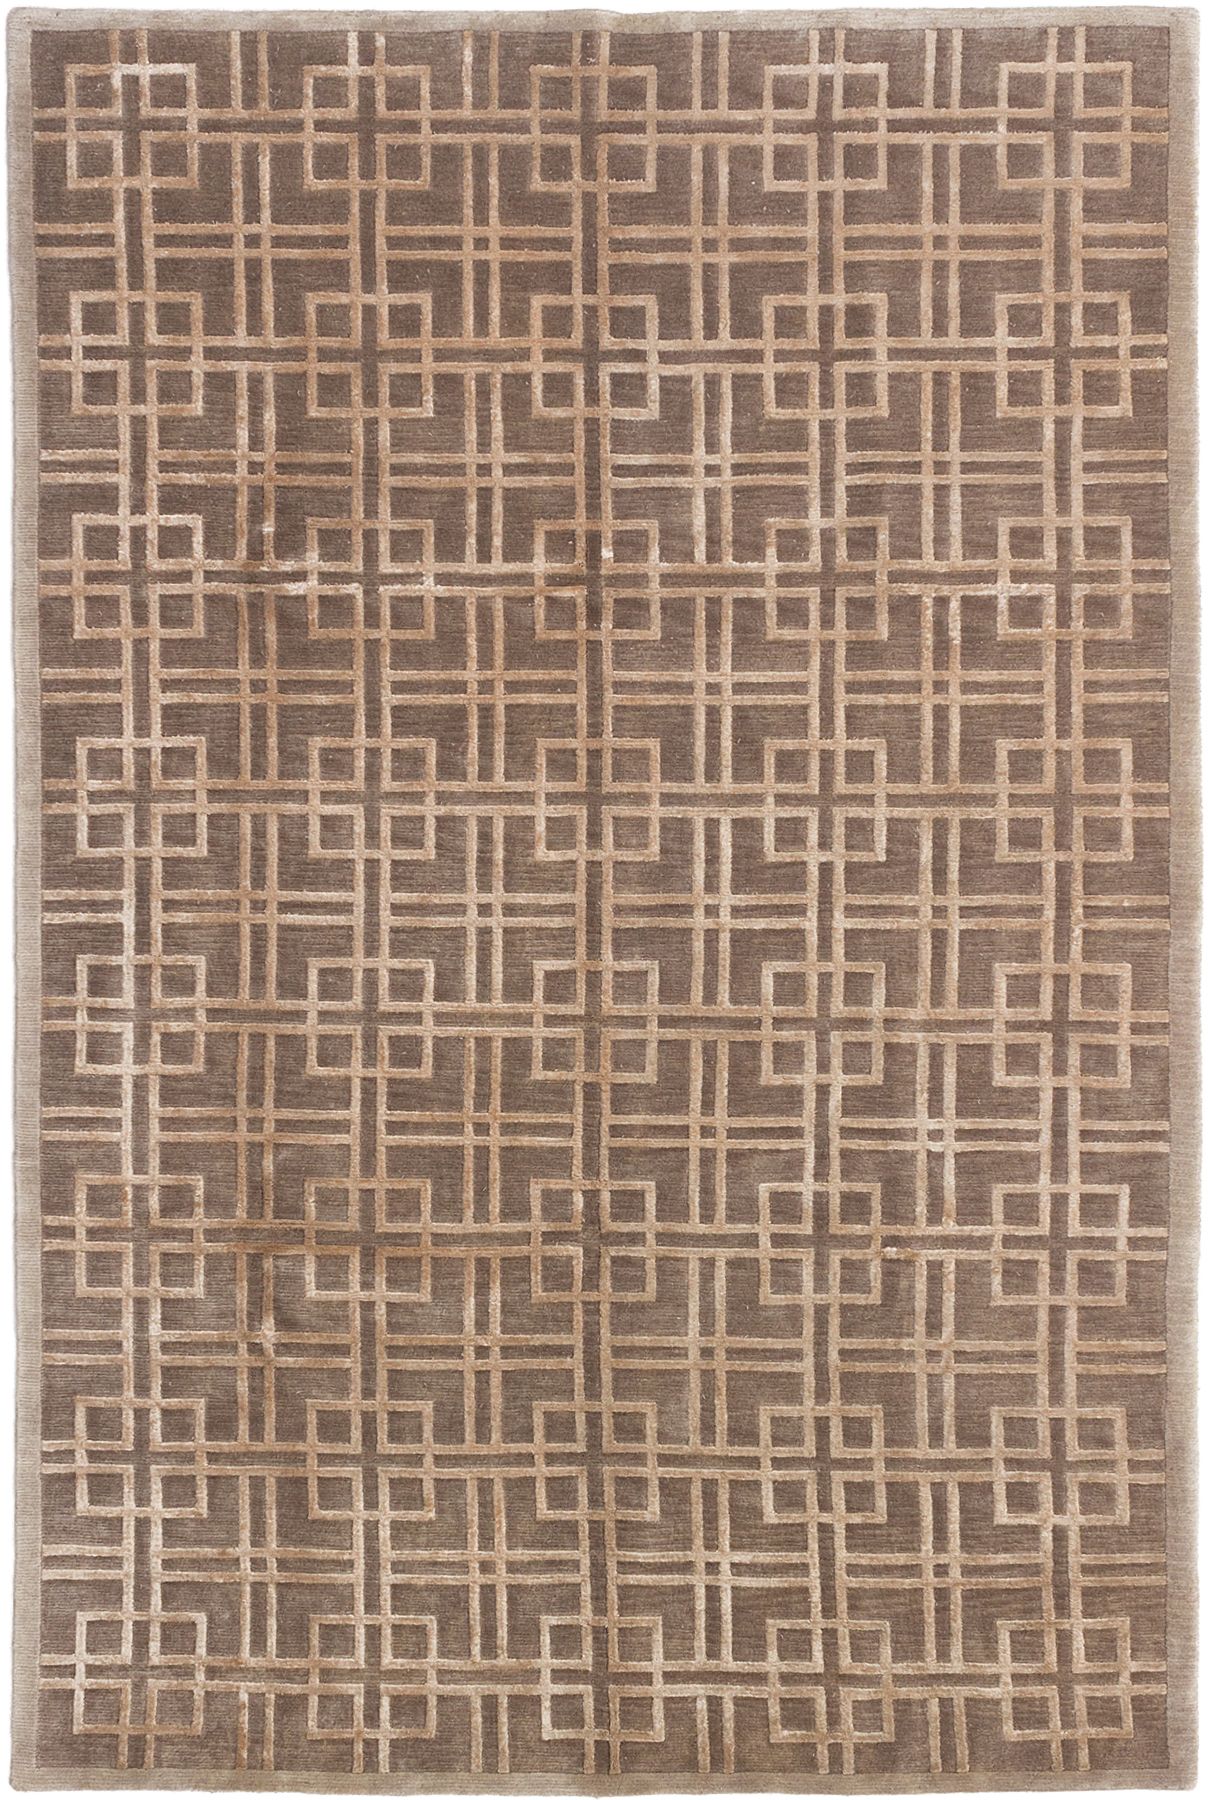 Hand-knotted Silk Touch Brown Wool/Silk Rug 5'6" x 8'4" Size: 5'6" x 8'4"  